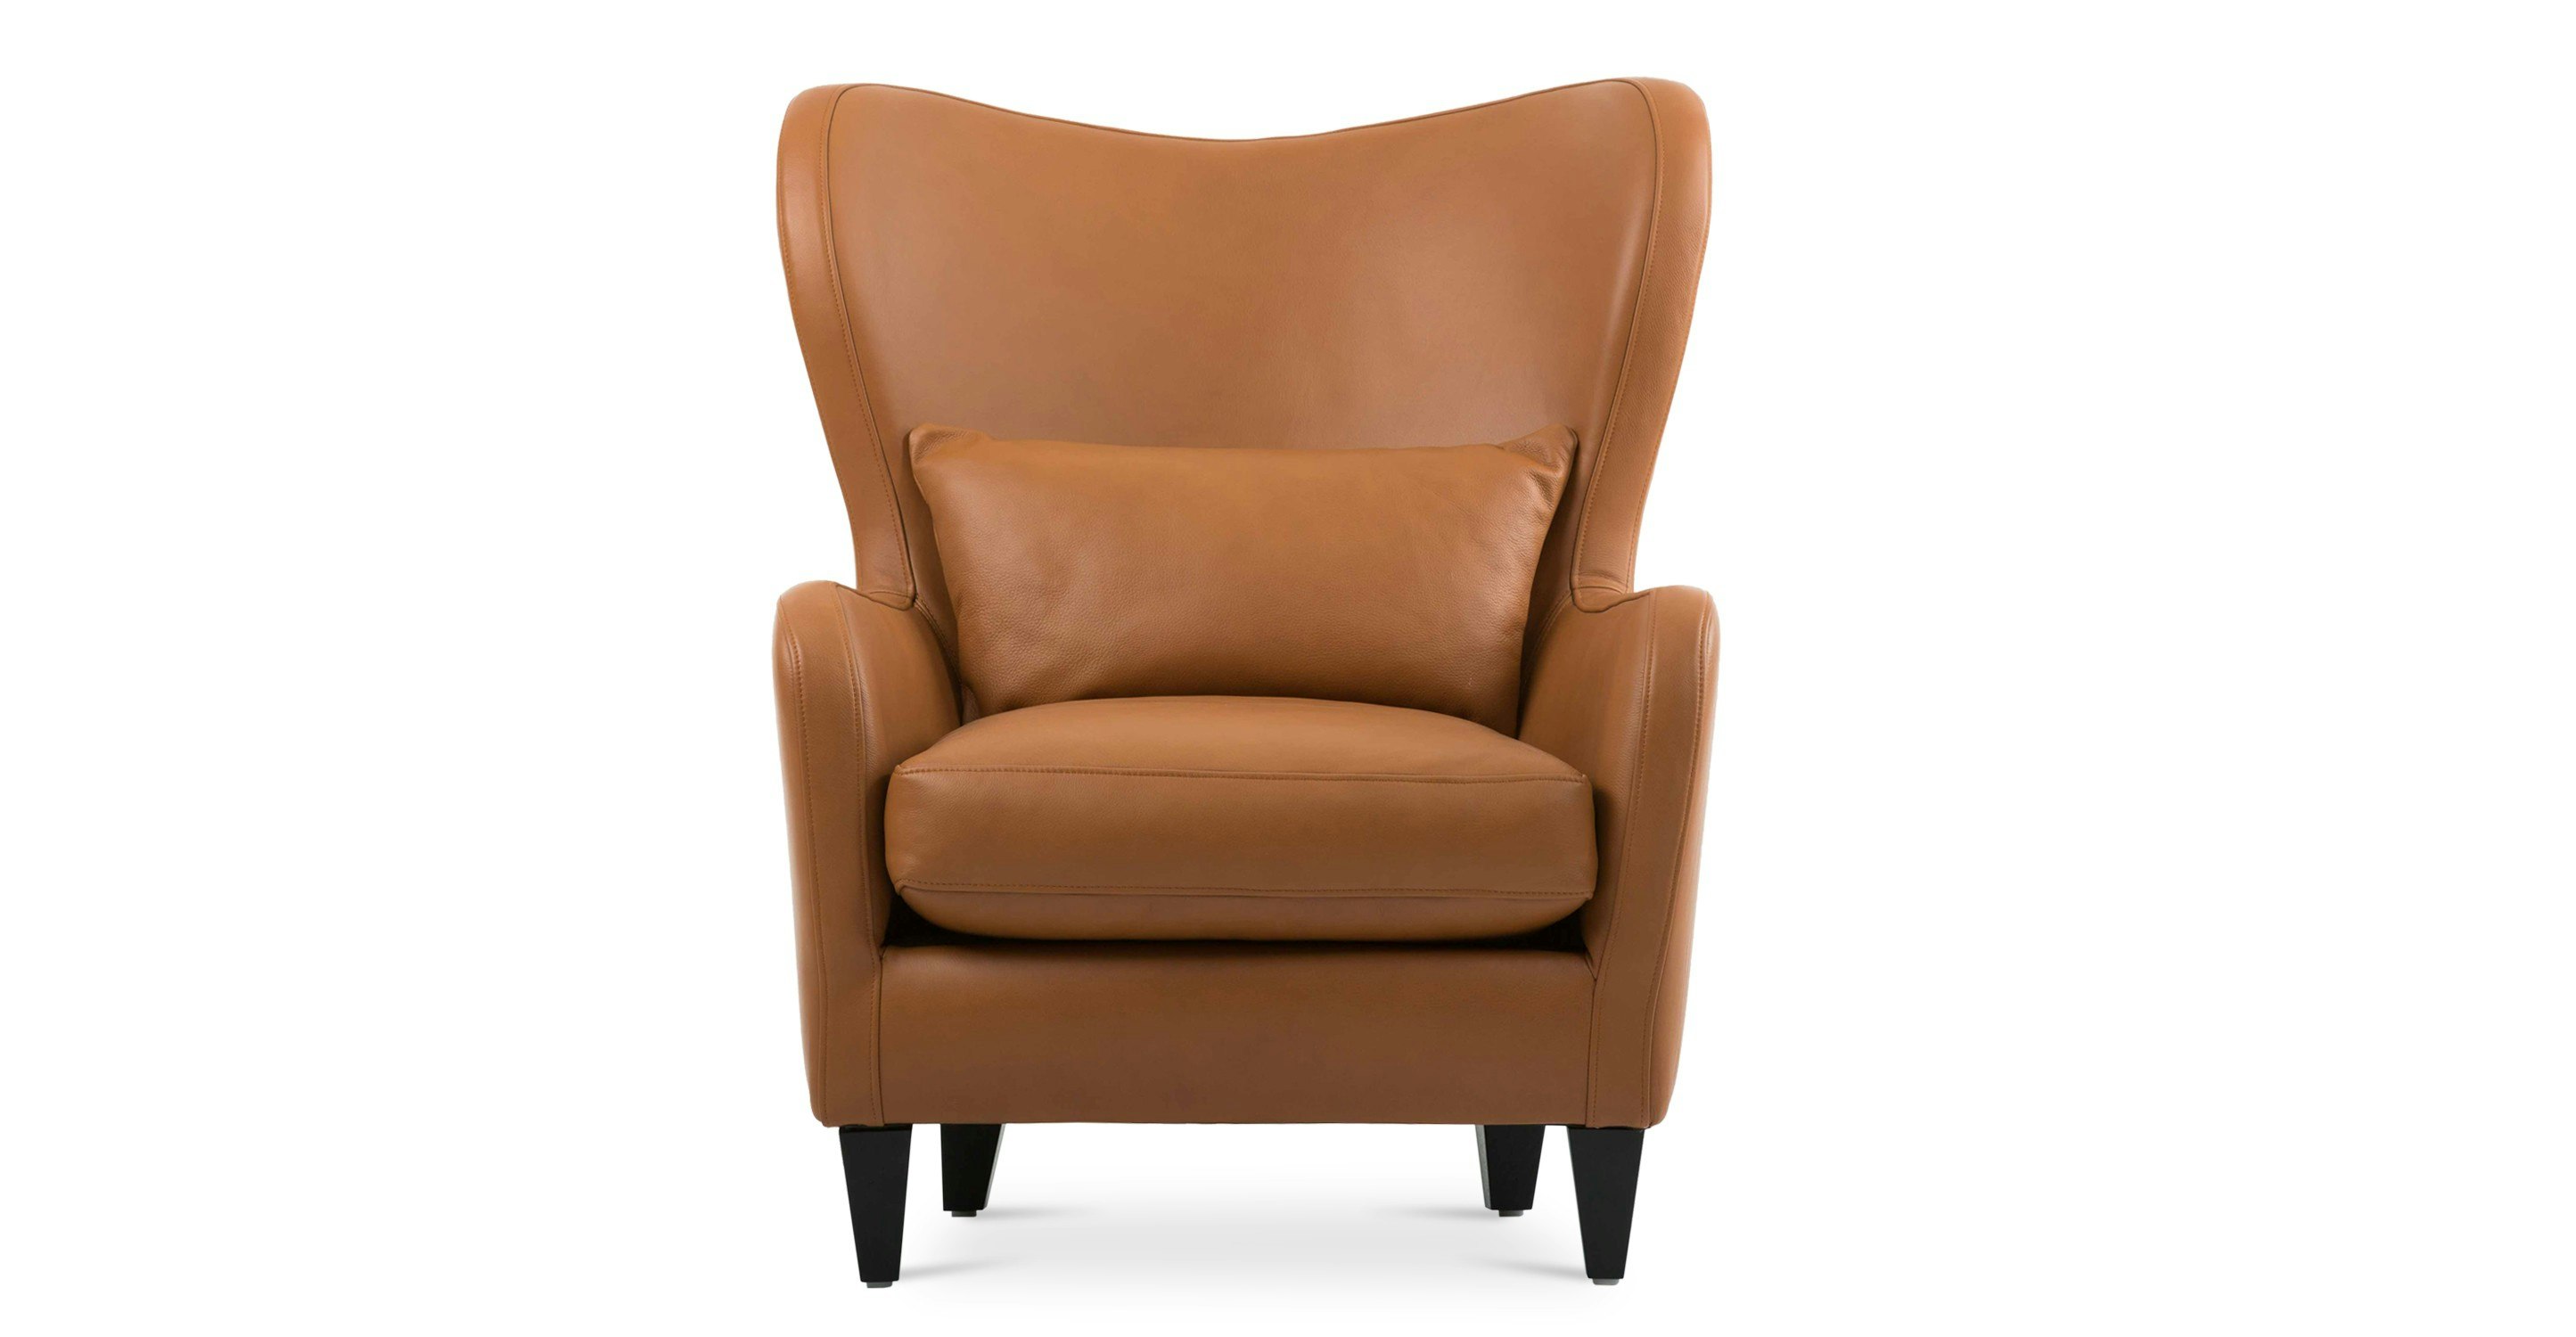 Polo Cognac Tan Leather Armchair - Lounge Chairs - Article | Modern